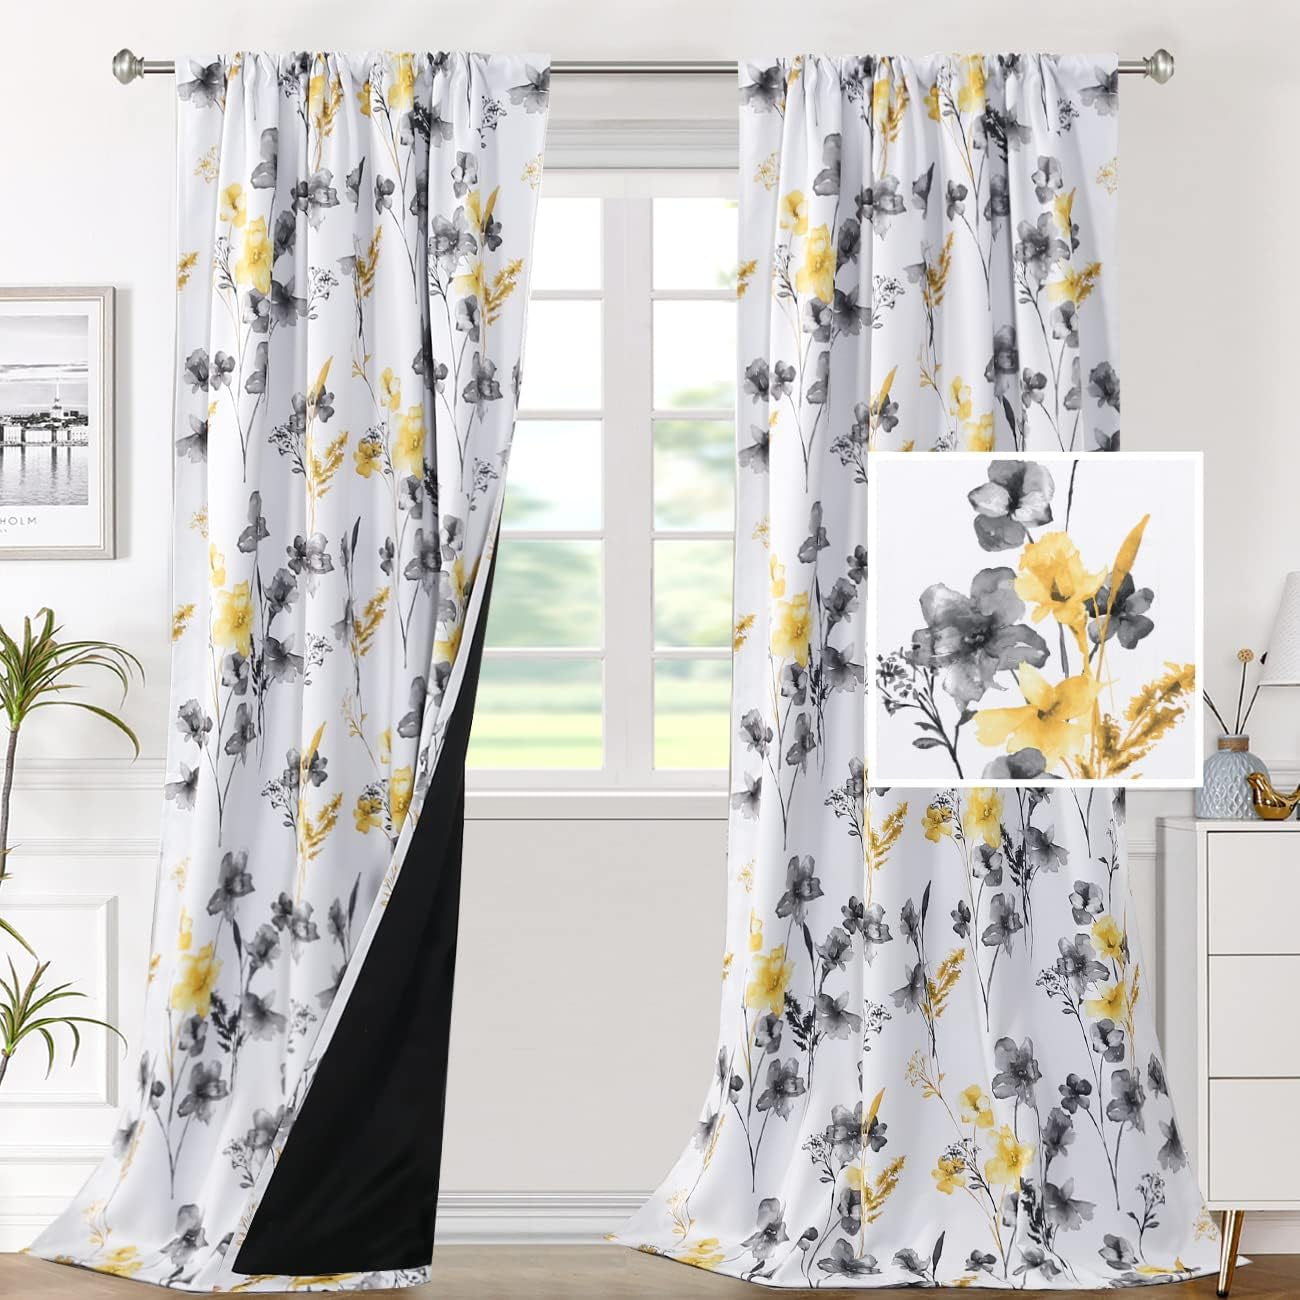 H.VERSAILTEX 100% Blackout Curtains for Bedroom Cattleya Floral Printed Drapes 84 Inches Long Leah Floral Pattern Full Light Blocking Drapes with Black Liner Rod Pocket 2 Panels, Navy/Taupe  H.VERSAILTEX Grey/Yellow 52"W X 96"L 